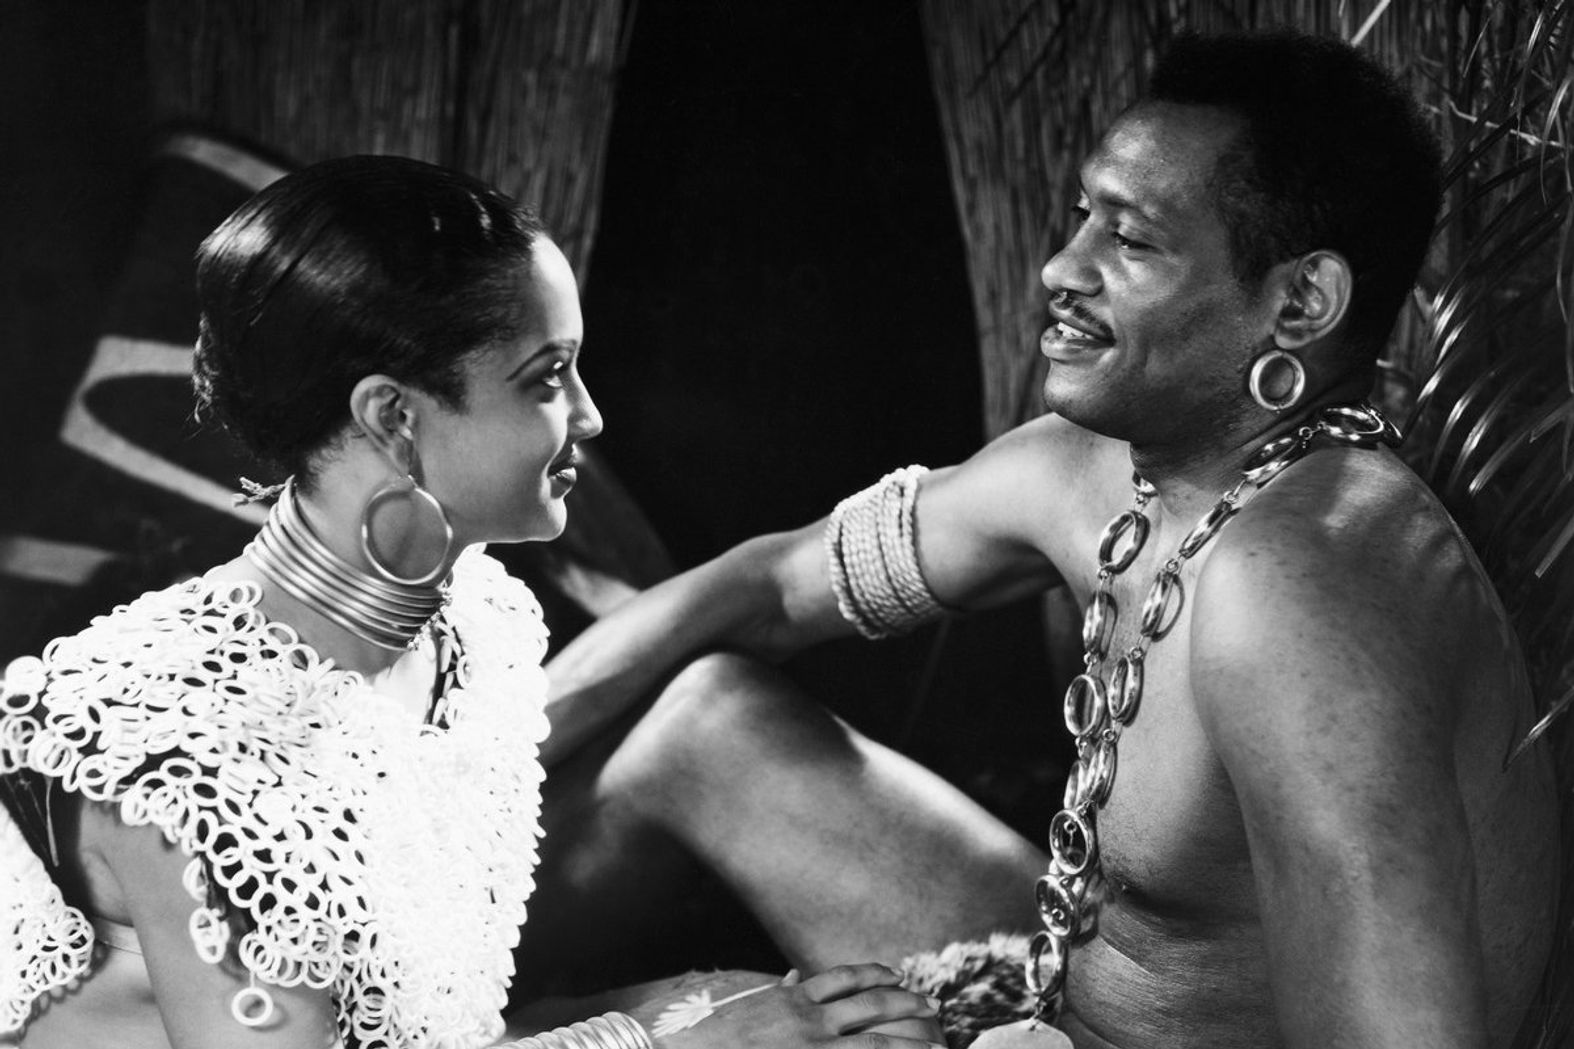 Nina Mae McKinney as Lilongo and Paul Robeson as Bosambo, both in the movie Sanders of the River. The film is directed by Zoltan Korda.